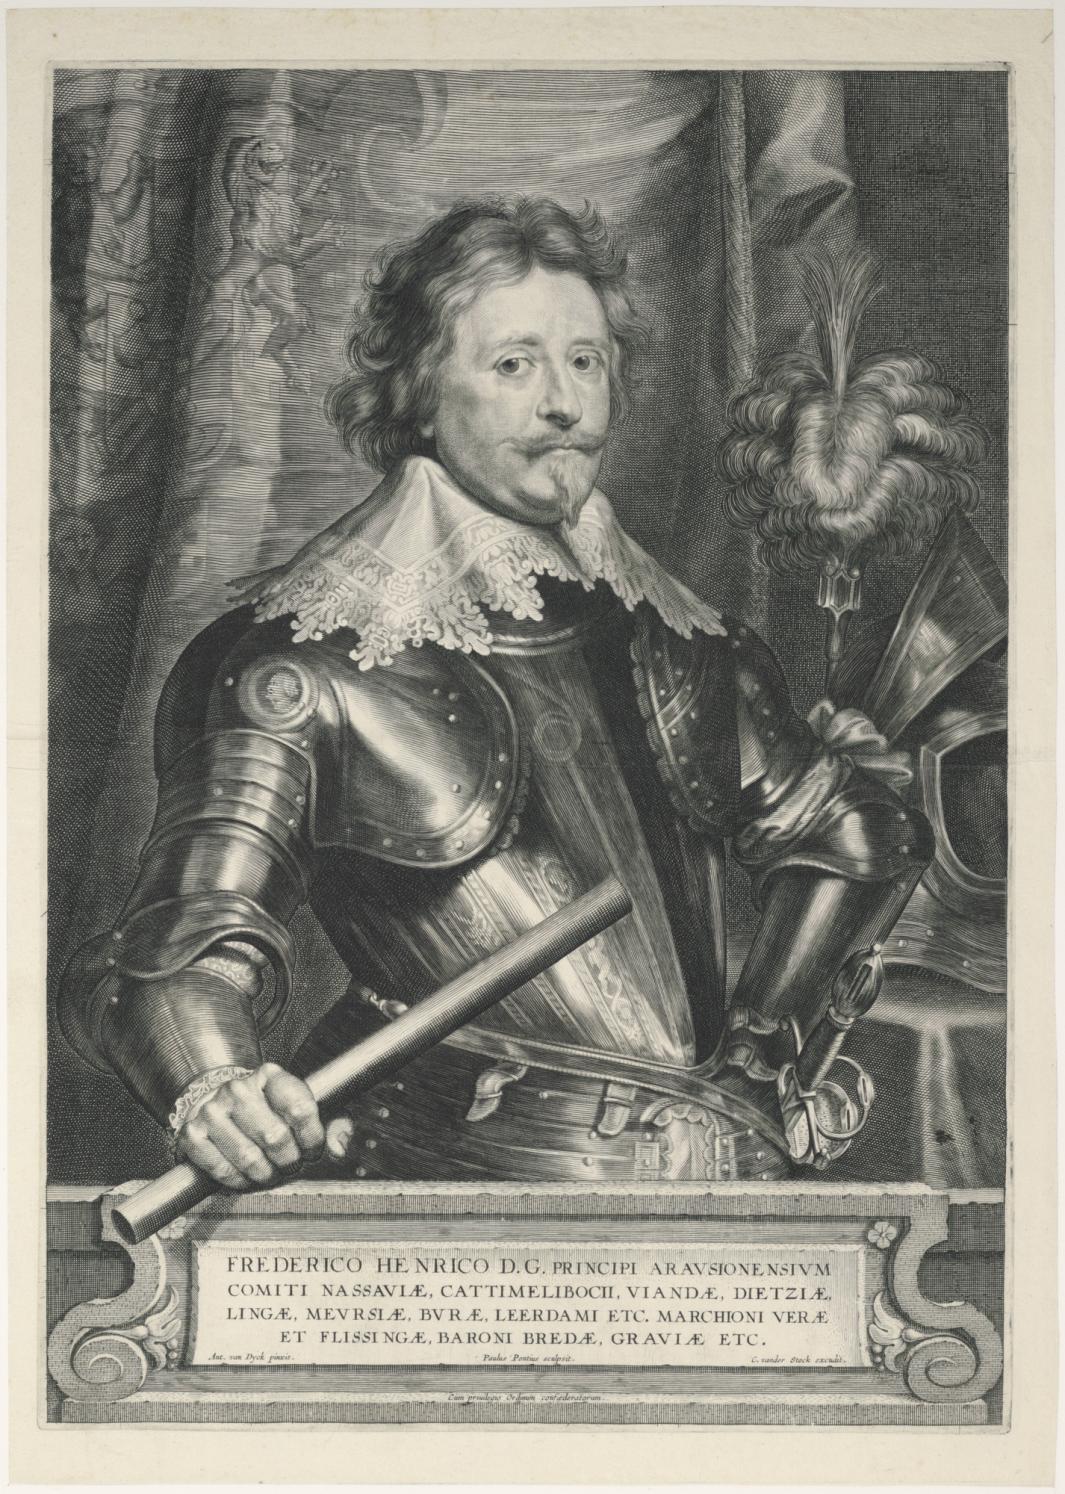 engraving of portrait of man standing in armor, with lace collar, holding baton and text below